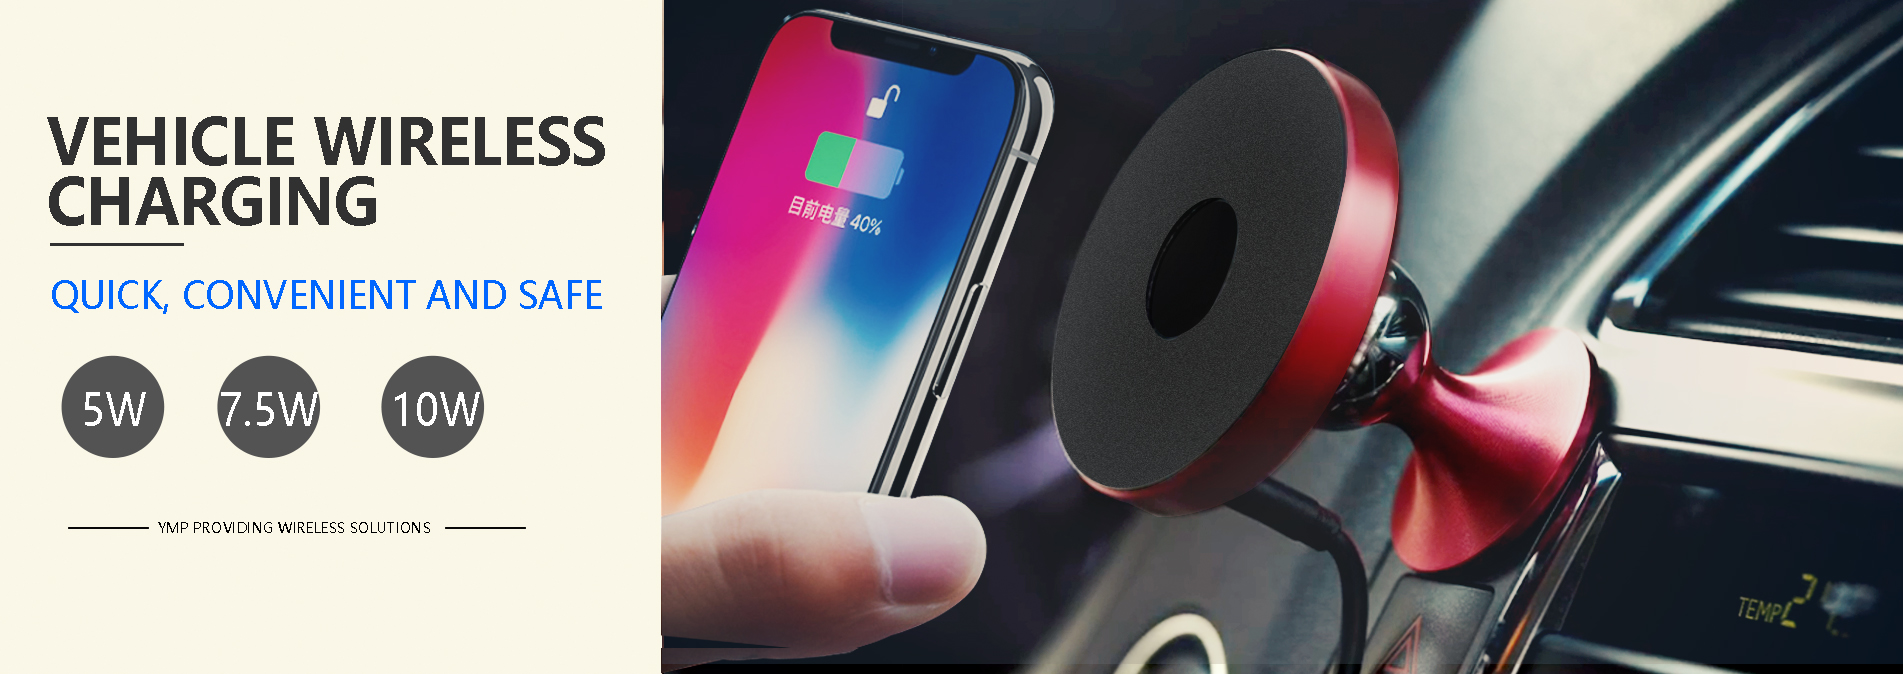 car-mounted-wireless-charger-C5